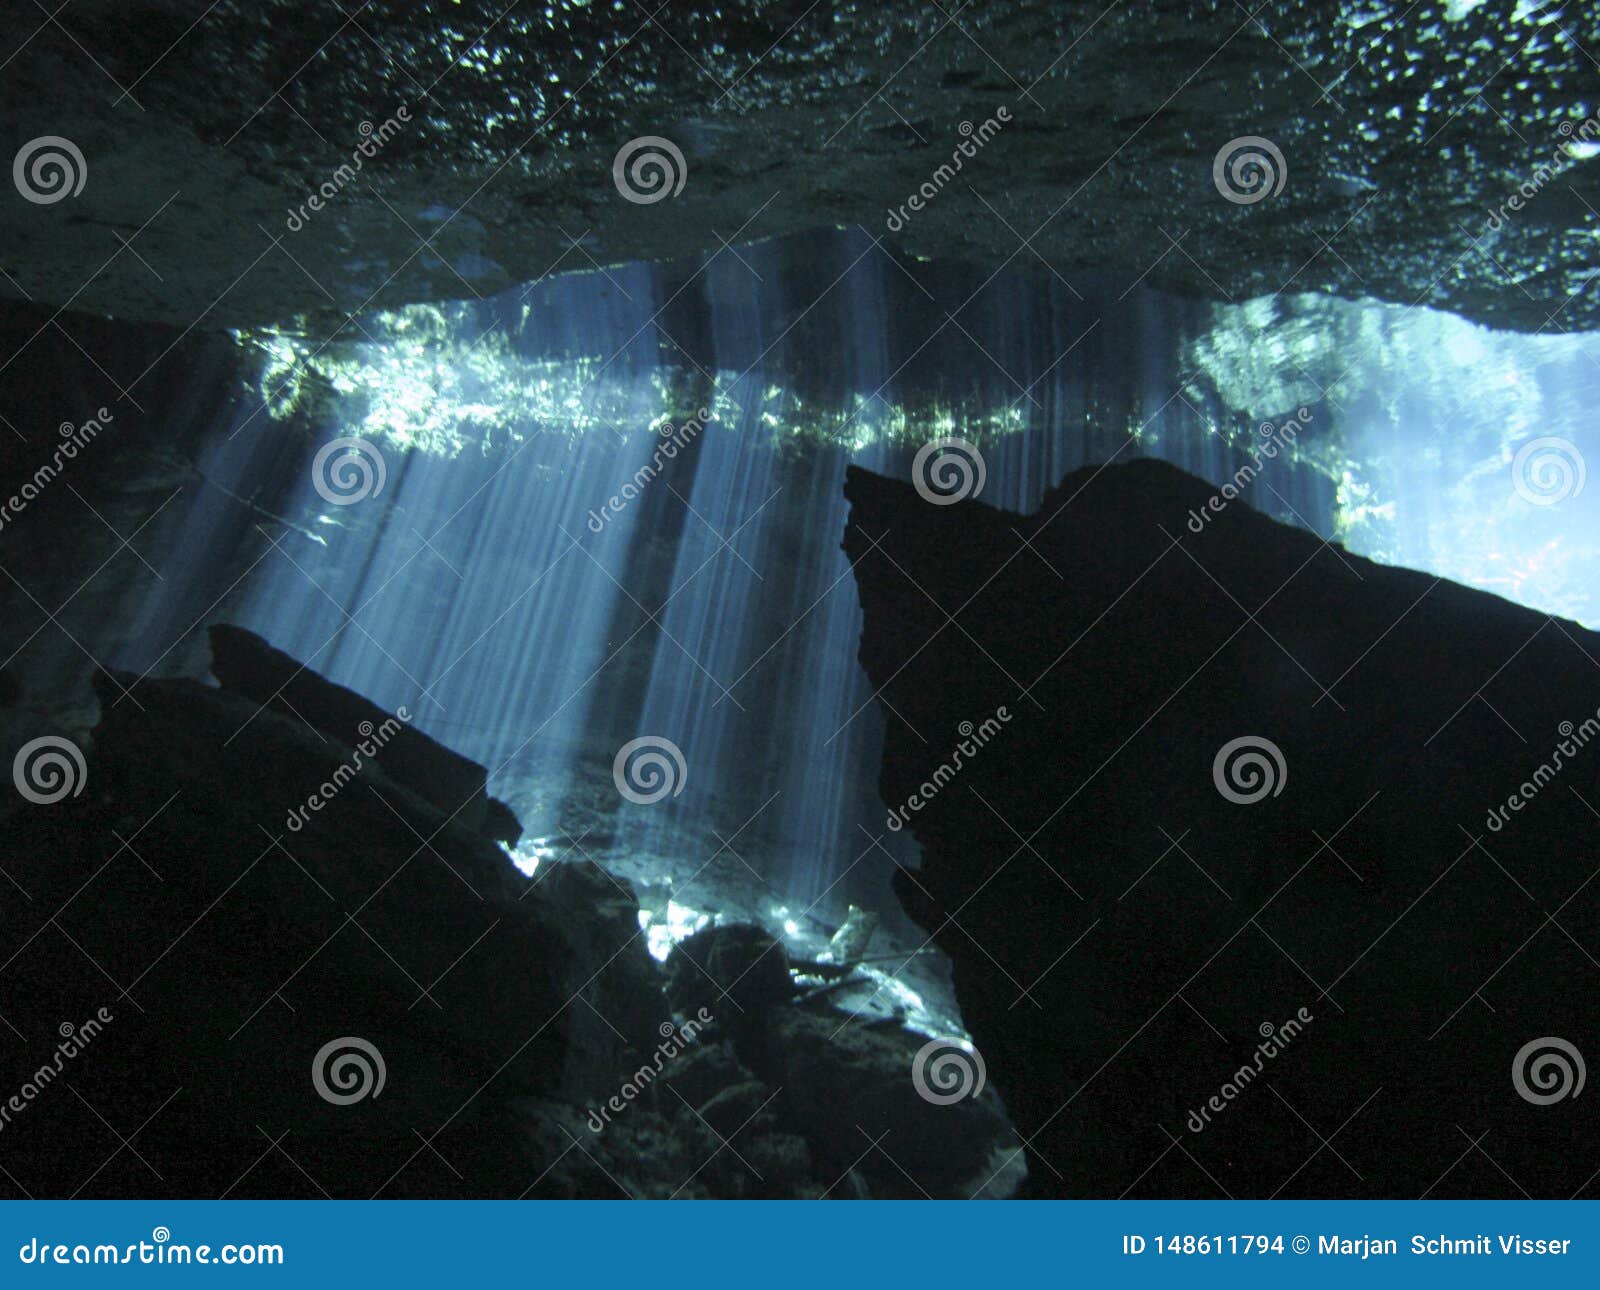 sun rays entering the water in an underwater cave.